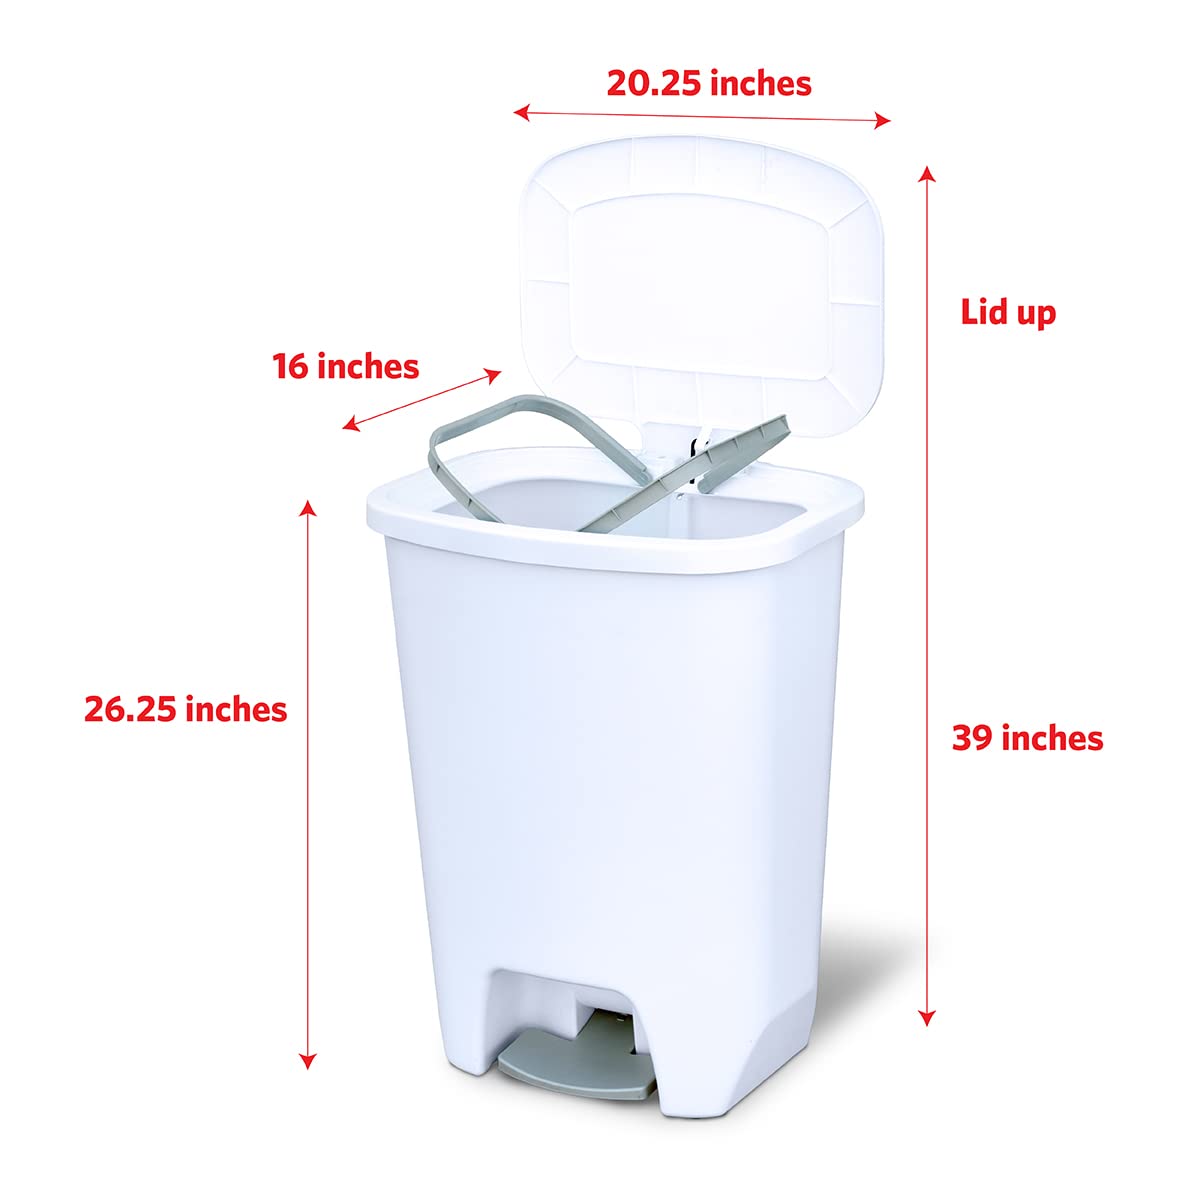 Glad Kitchen Trash Can 20 Gallon | Large Plastic Waste Bin with Odor Protection of Lid | Hands Free with Step On Foot Pedal and Garbage Bag Rings, 20 Gallon, White